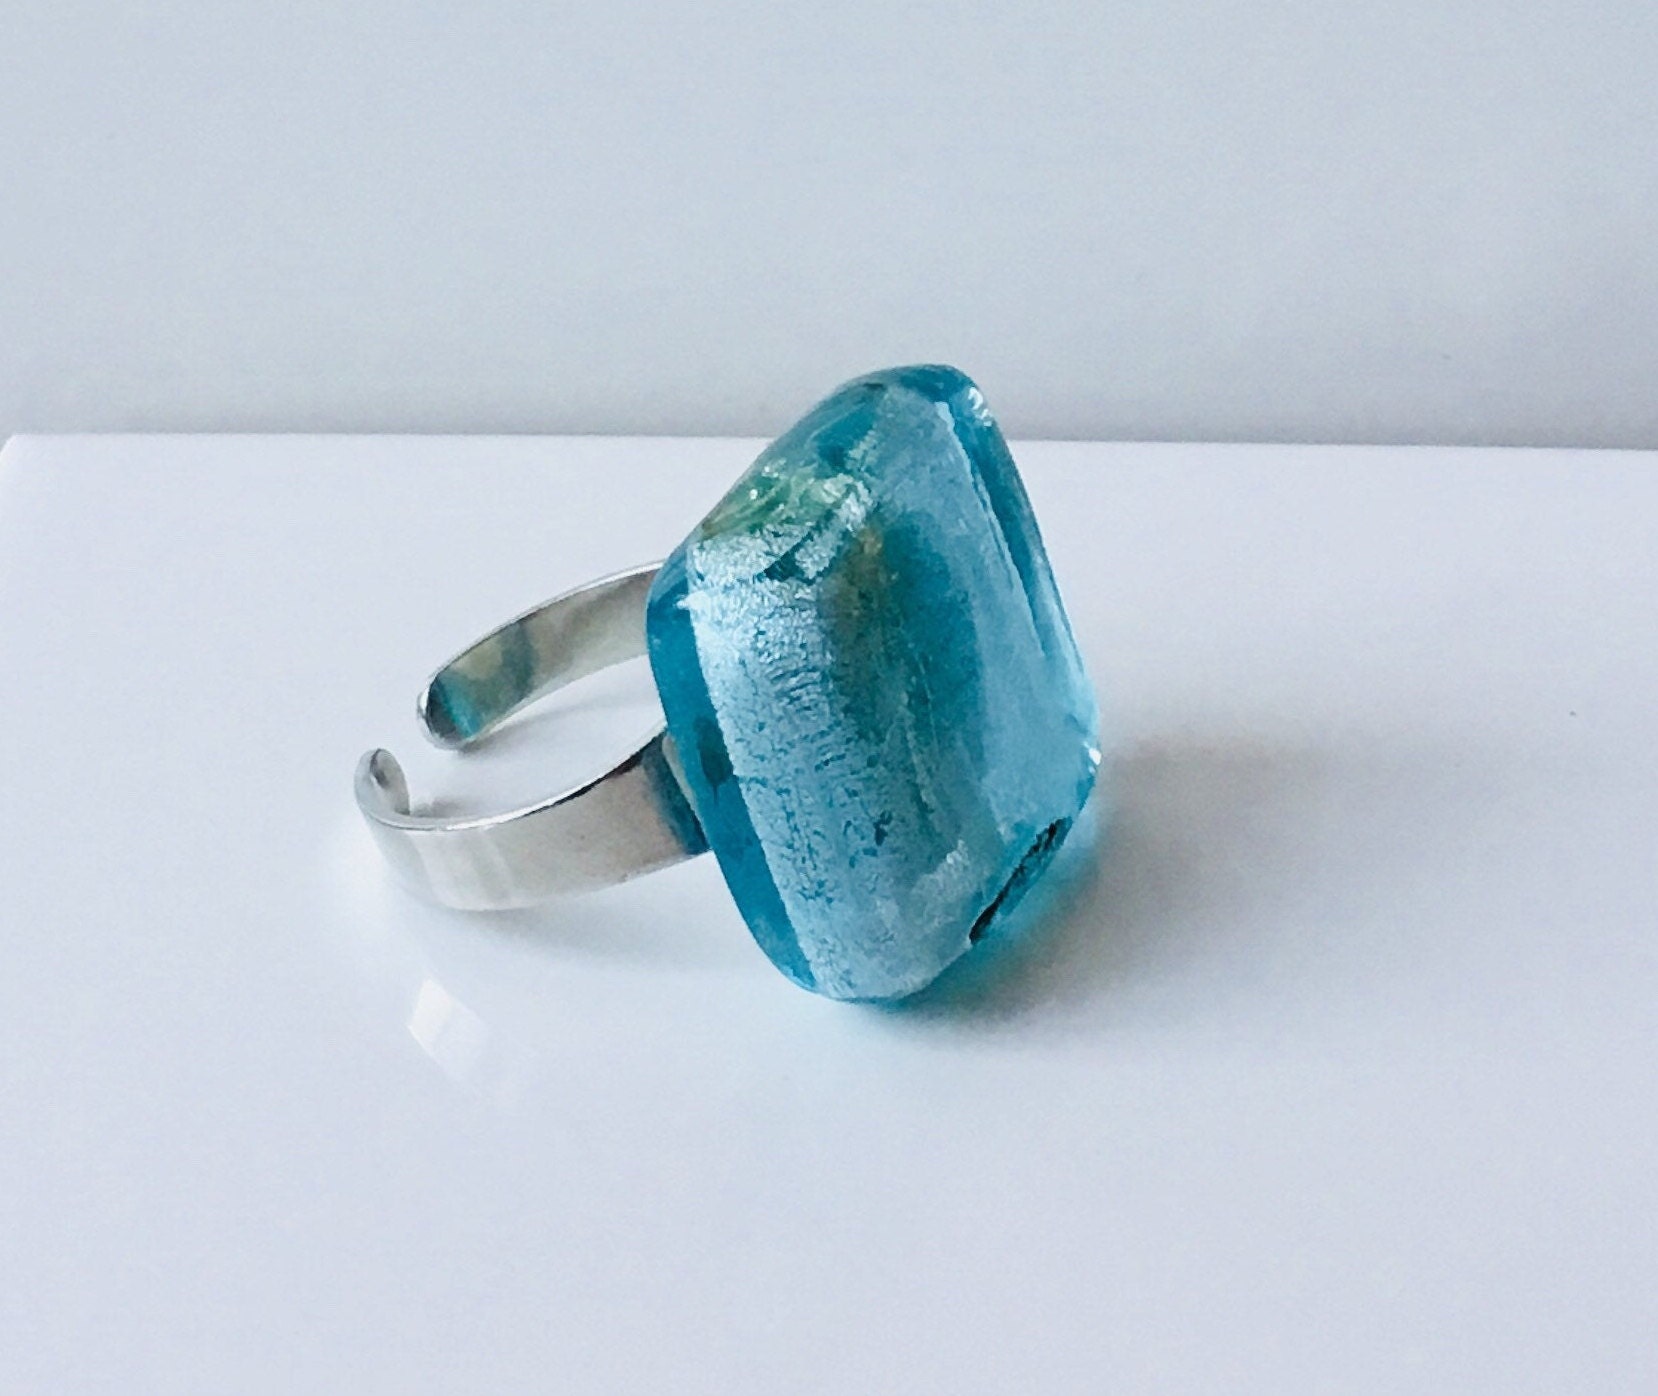 Handmade Silver Twisted Wire Ring with a large Blue Glass Stone